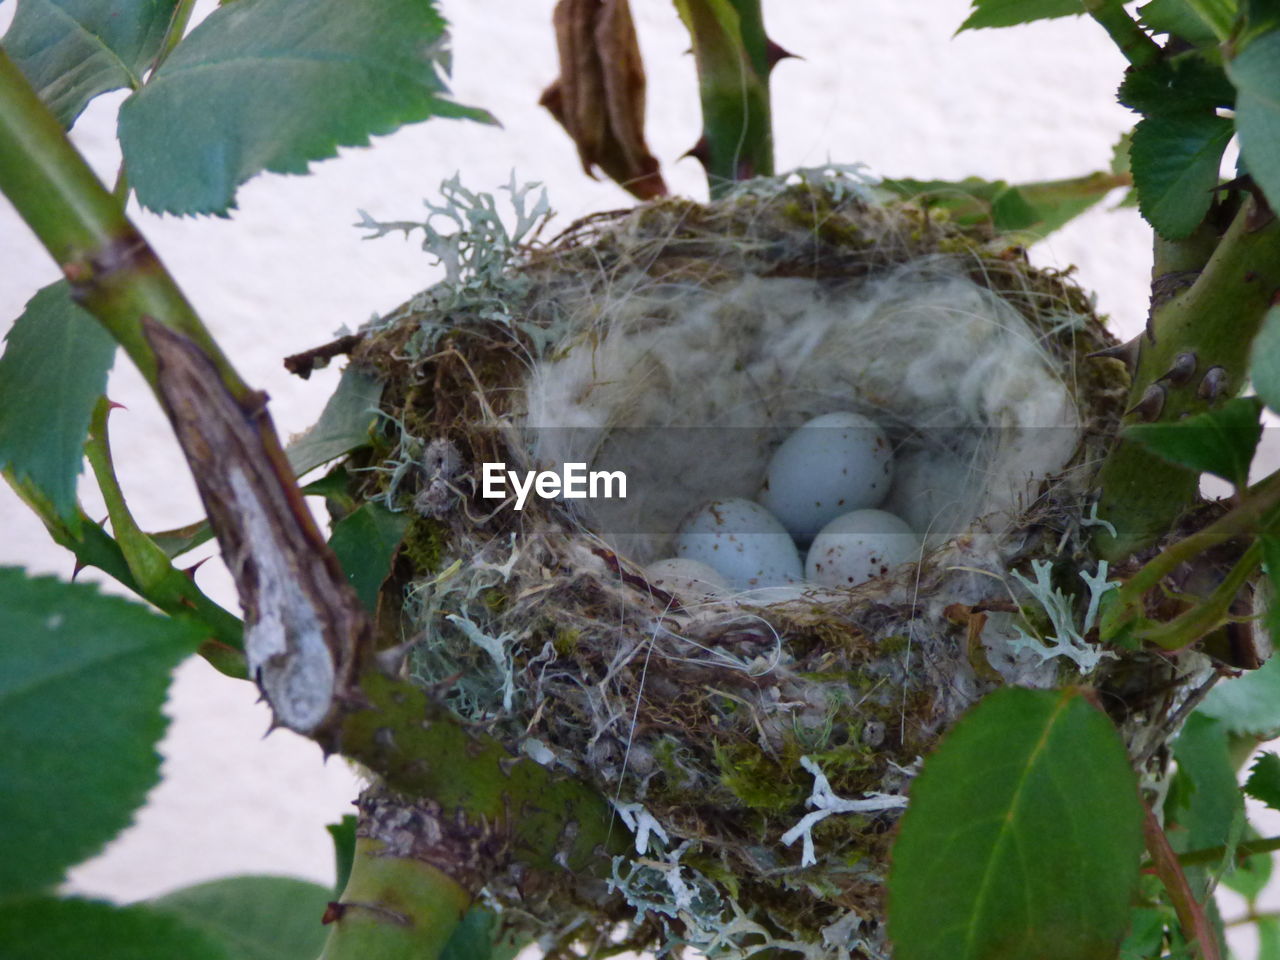 HIGH ANGLE VIEW OF NEST ON PLANT